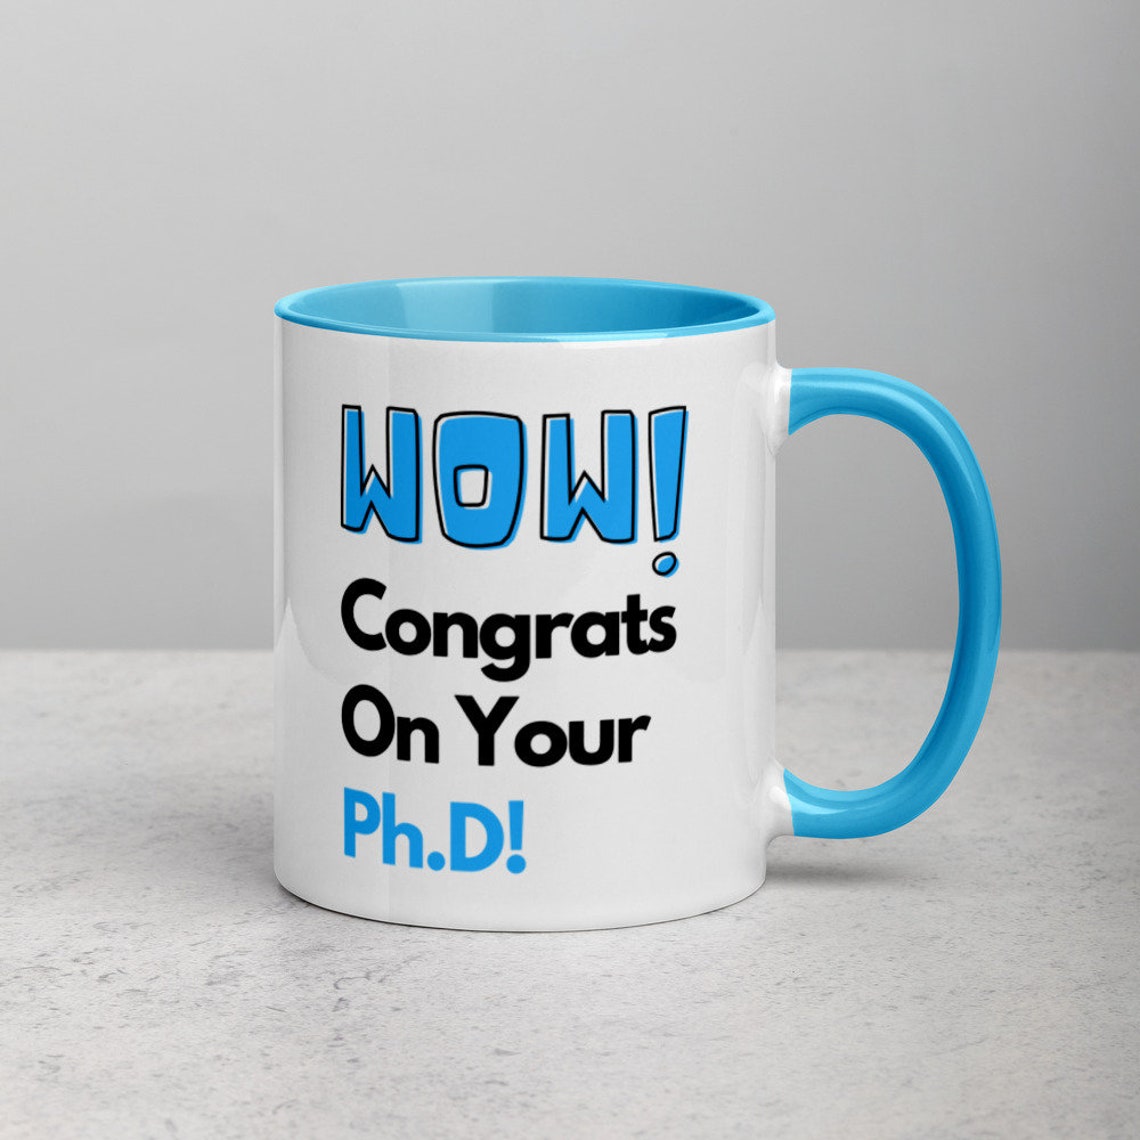 phd graduate funny gifts